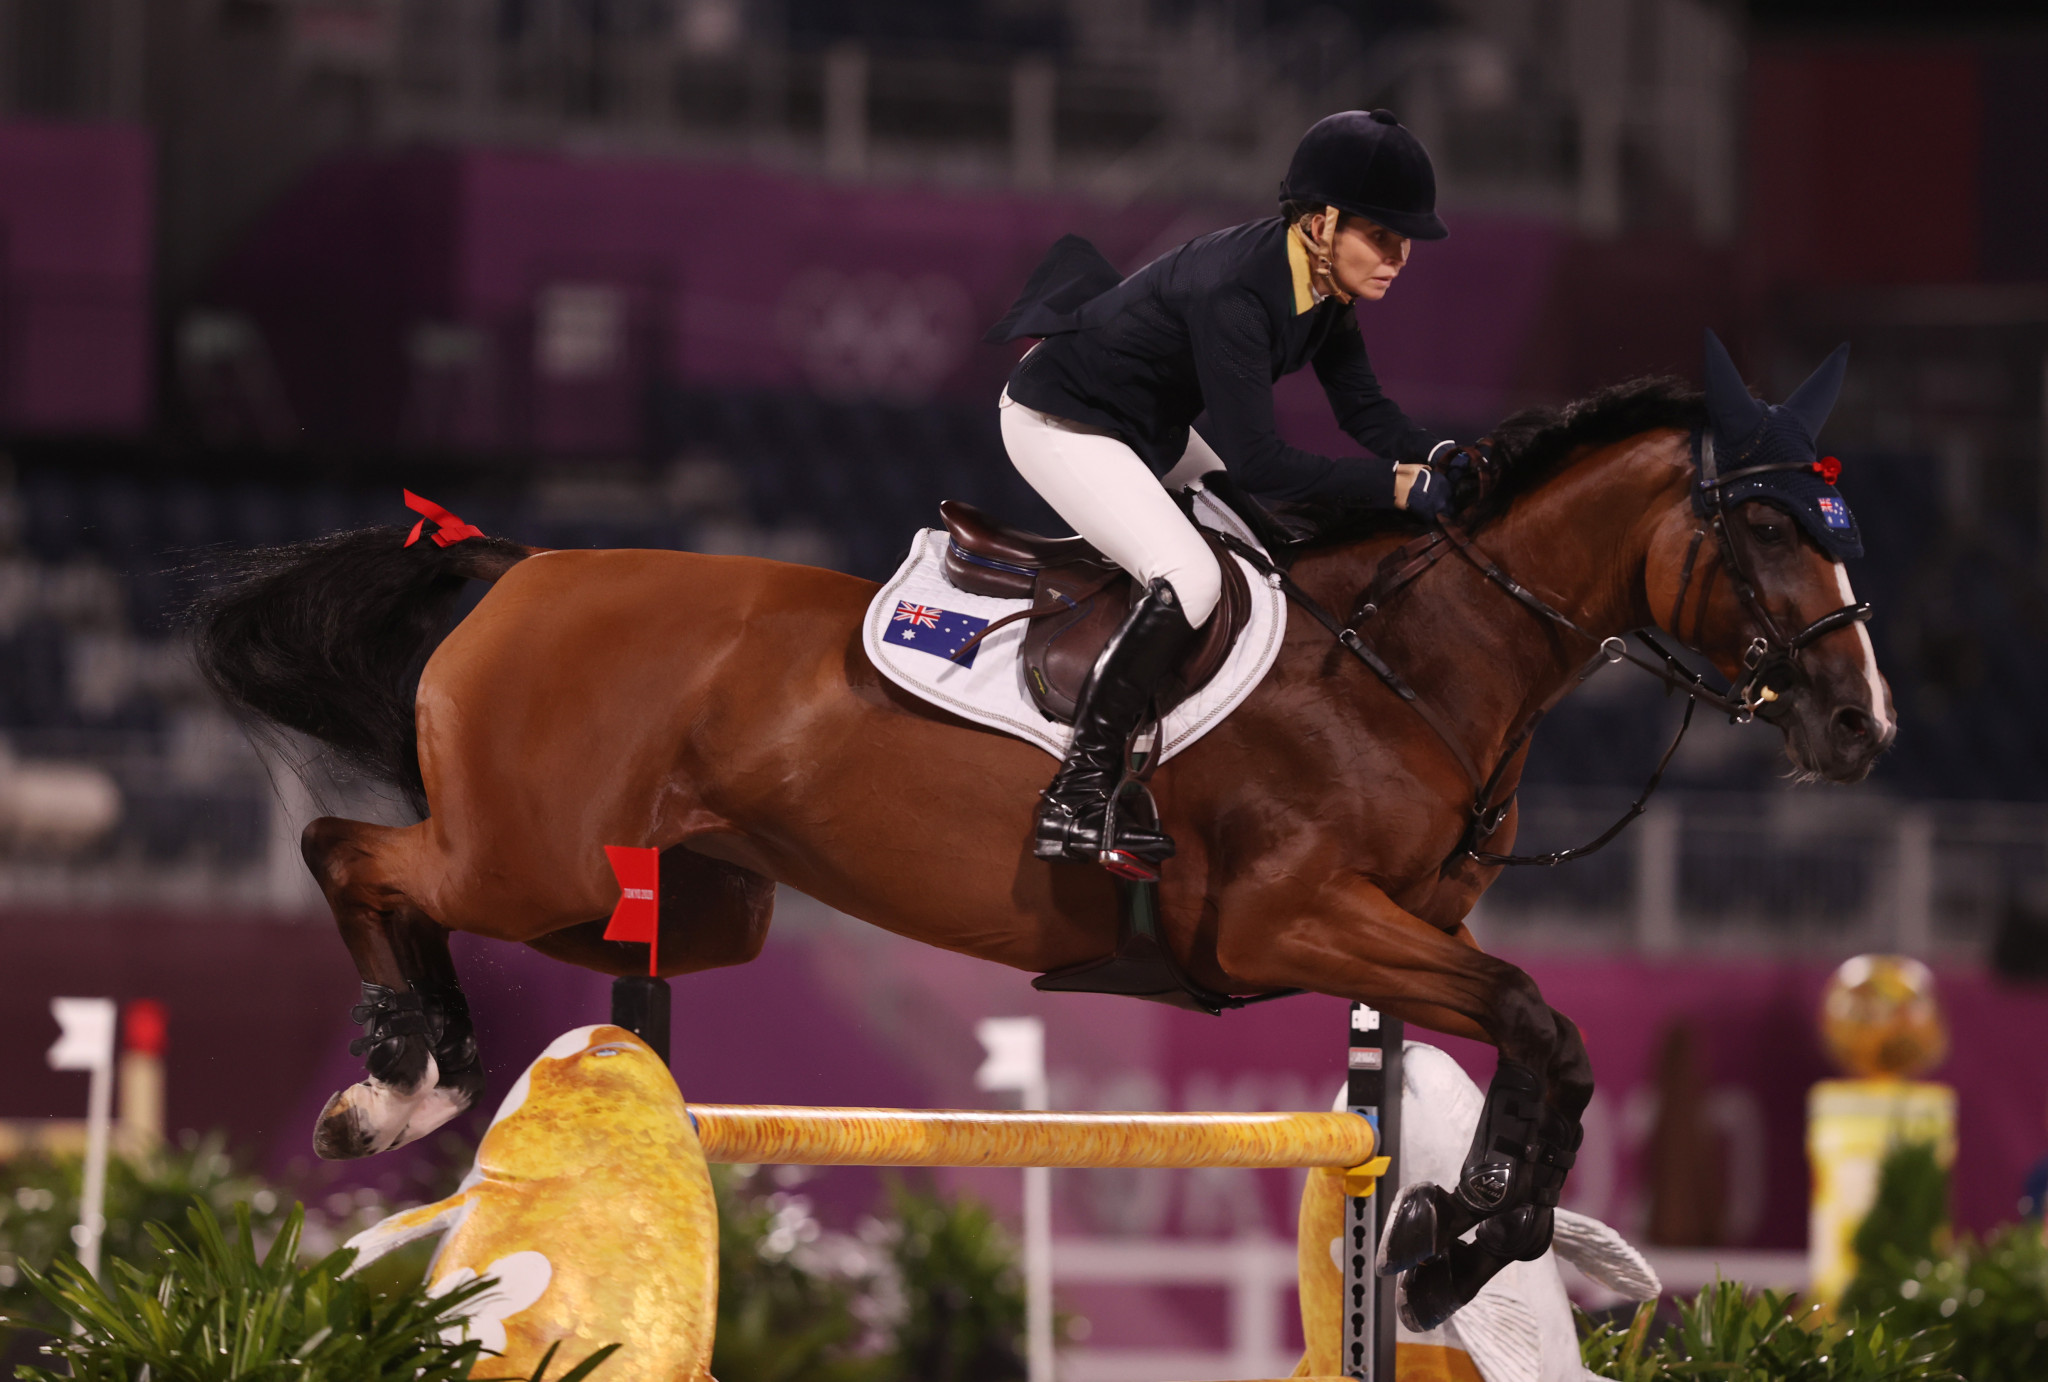 Edwina Tops-Alexander leads the Global Champions Tour individual standings heading into the second round of action in Rome ©Getty Images